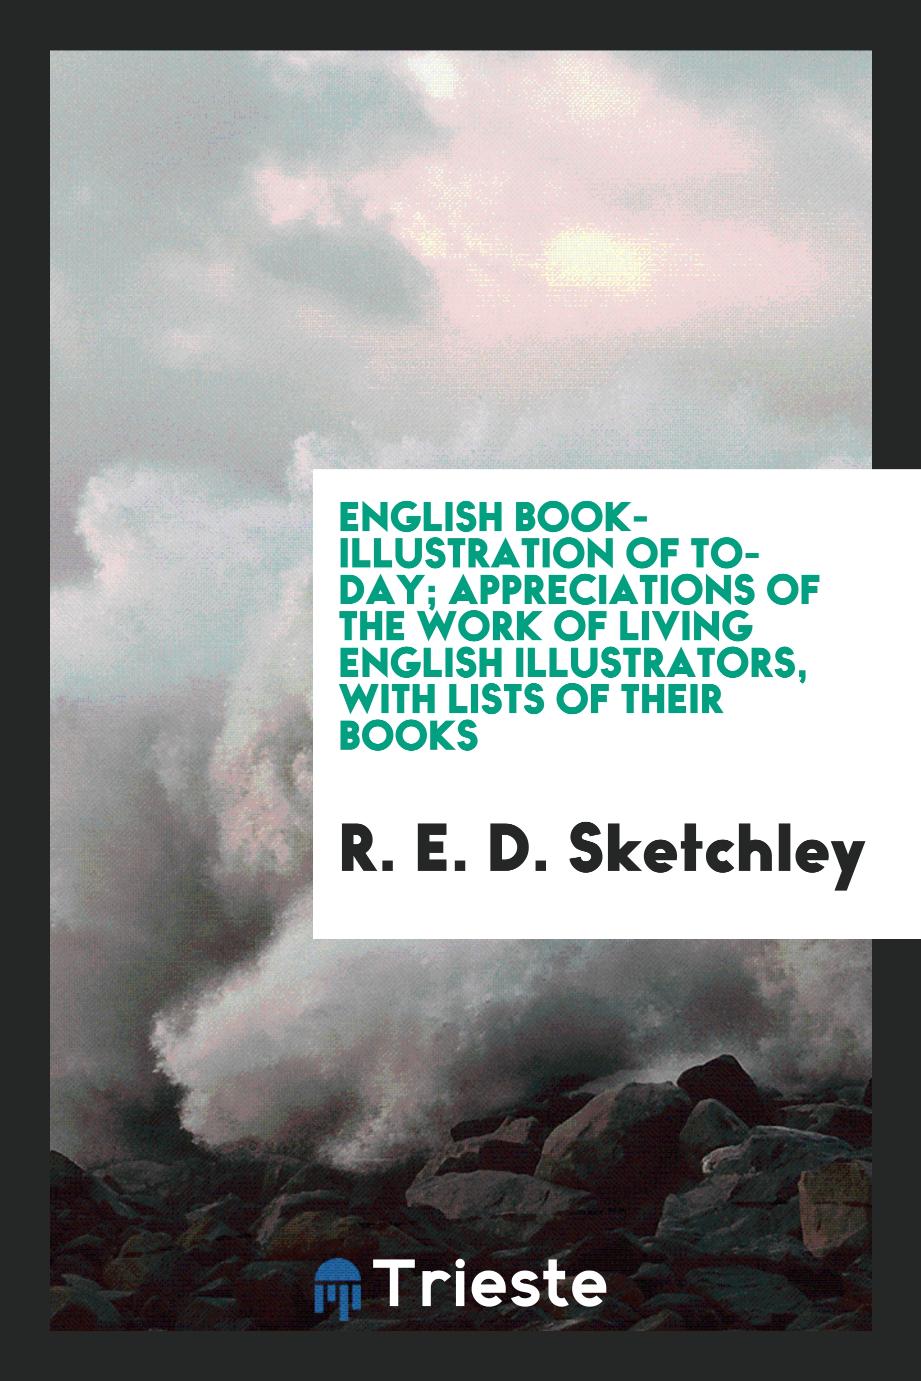 English book-illustration of to-day; appreciations of the work of living English illustrators, with lists of their books